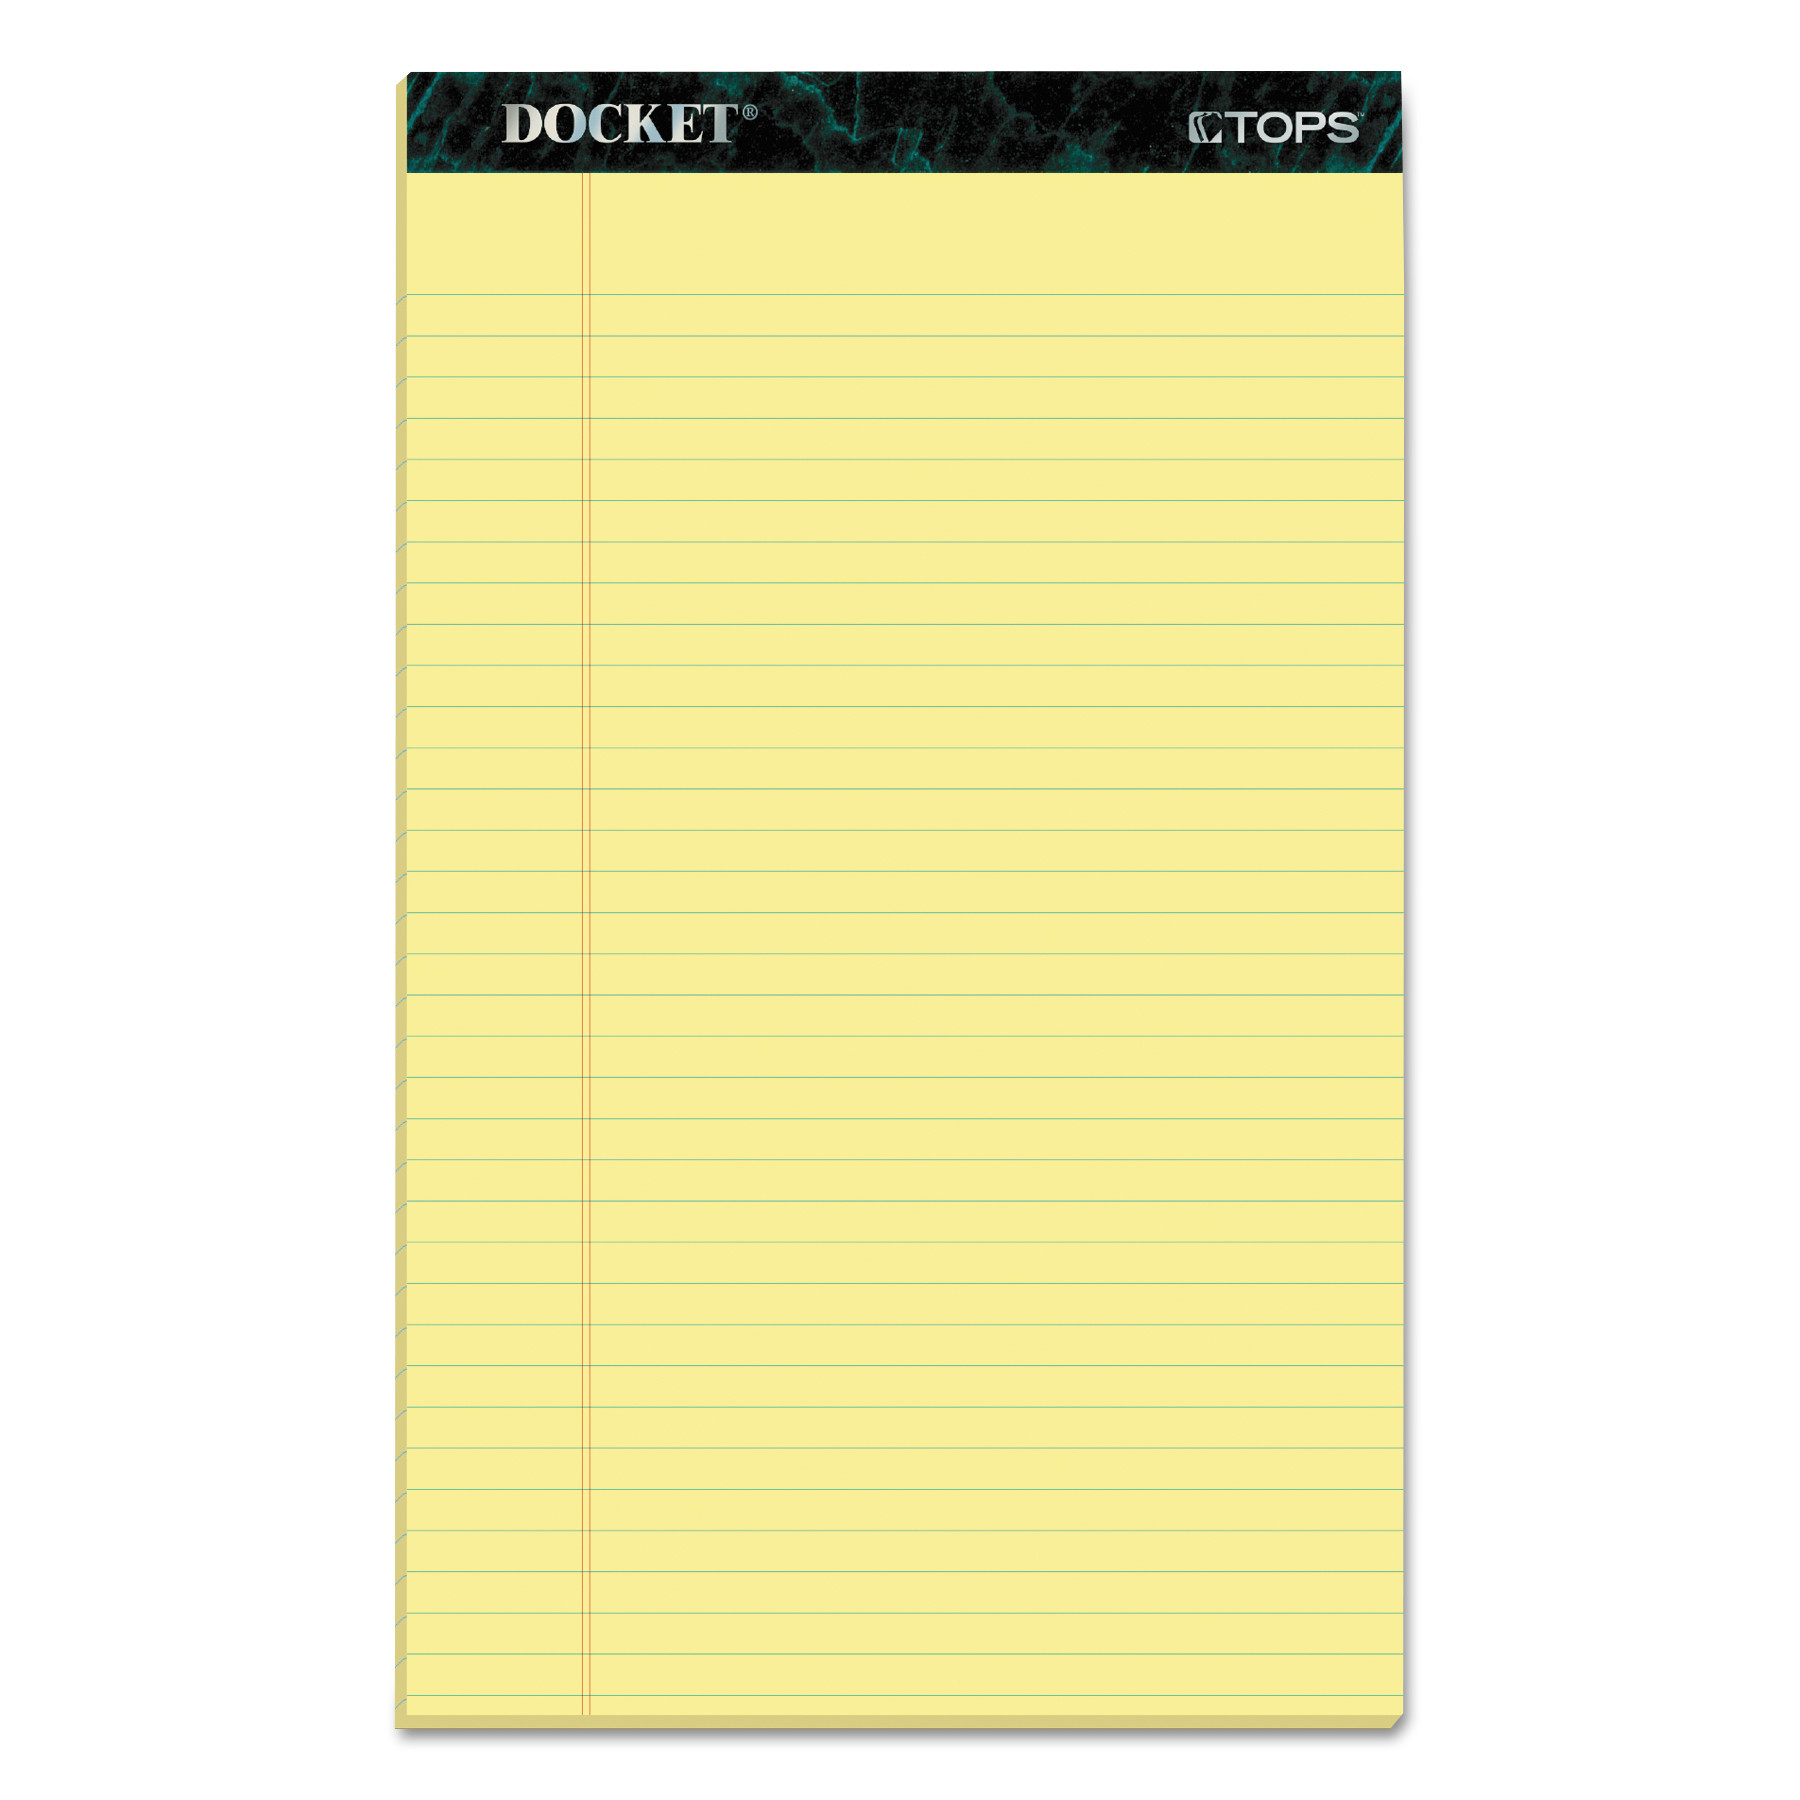  TOPS 63580 Docket Ruled Perforated Pads, Wide/Legal Rule, 8.5 x 14, Canary, 50 Sheets, 12/Pack (TOP63580) 